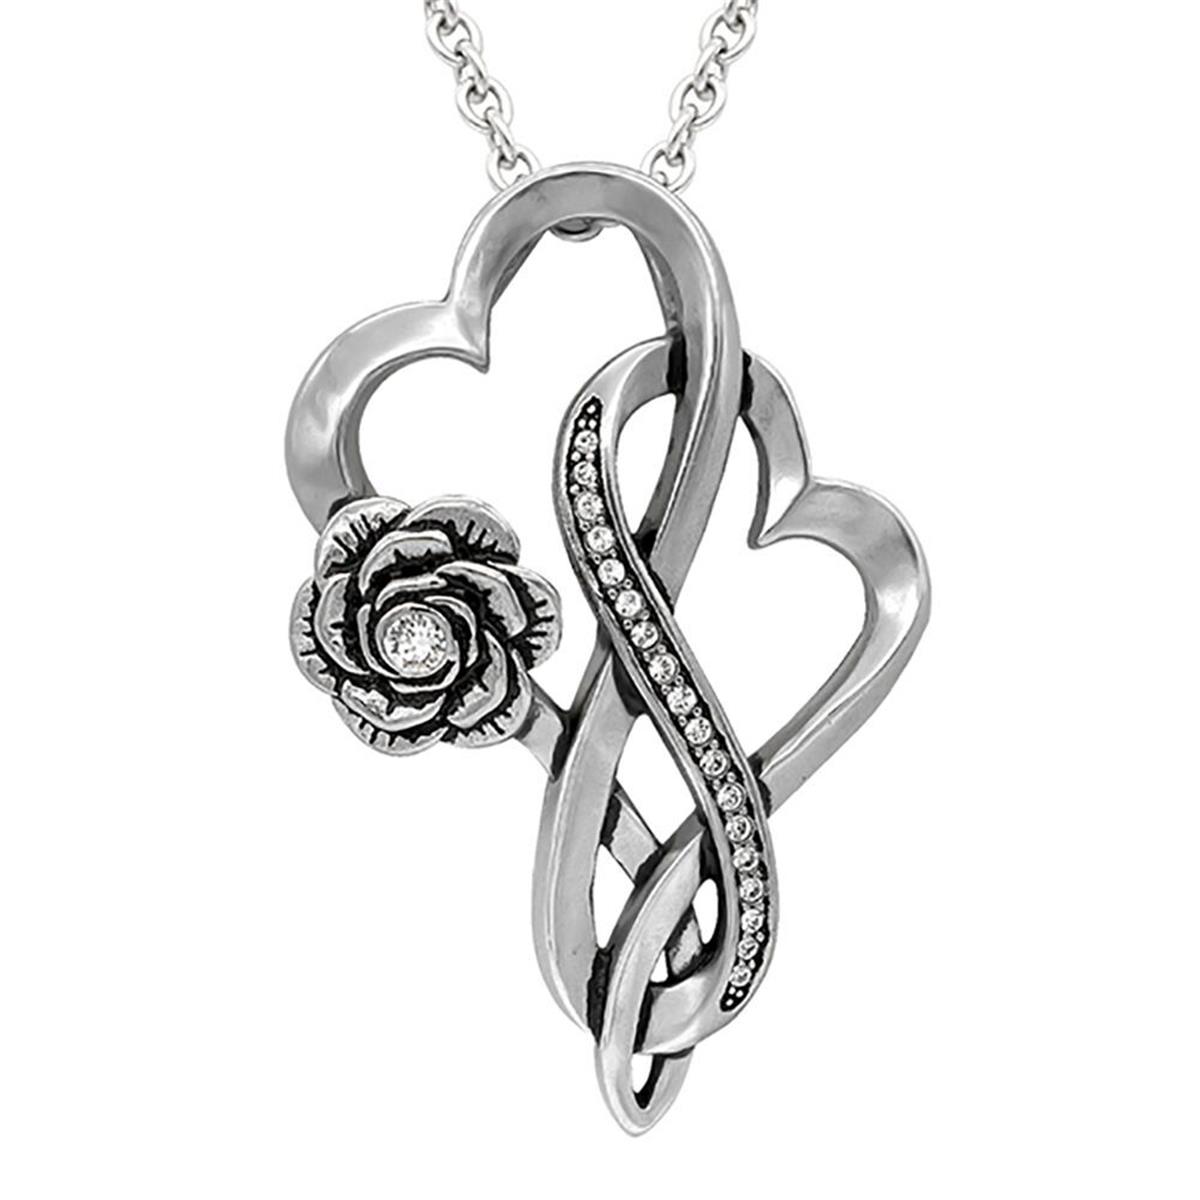 Cn181 Infinity Hearts With Rose Love Necklace